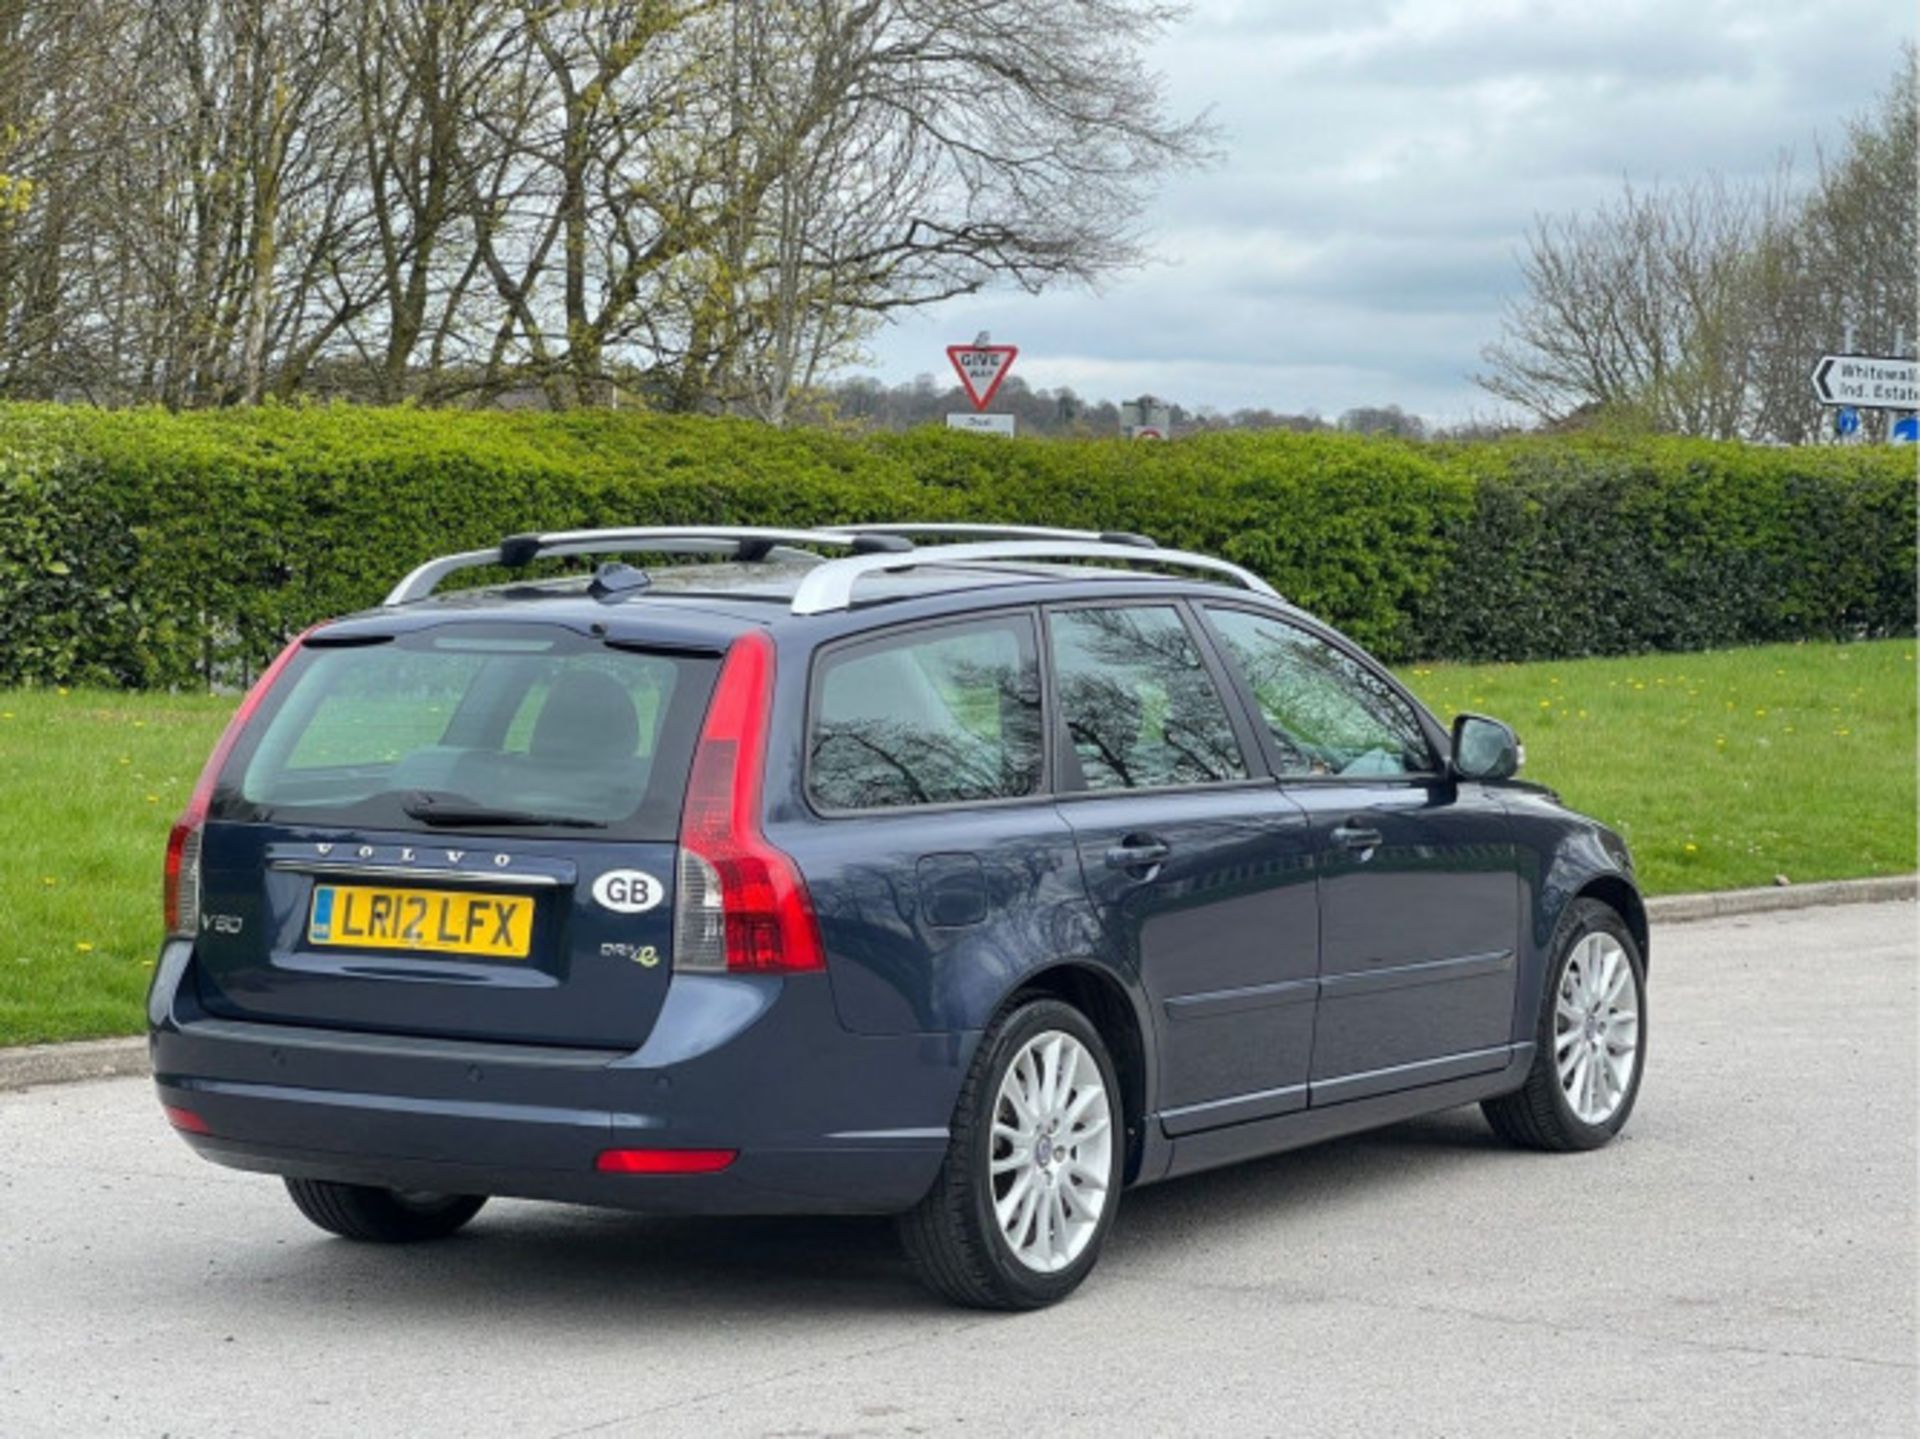 VOLVO V50 1.6D DRIVE SE LUX EDITION EURO 5 (S/S) 5DR (2012) - Image 24 of 88